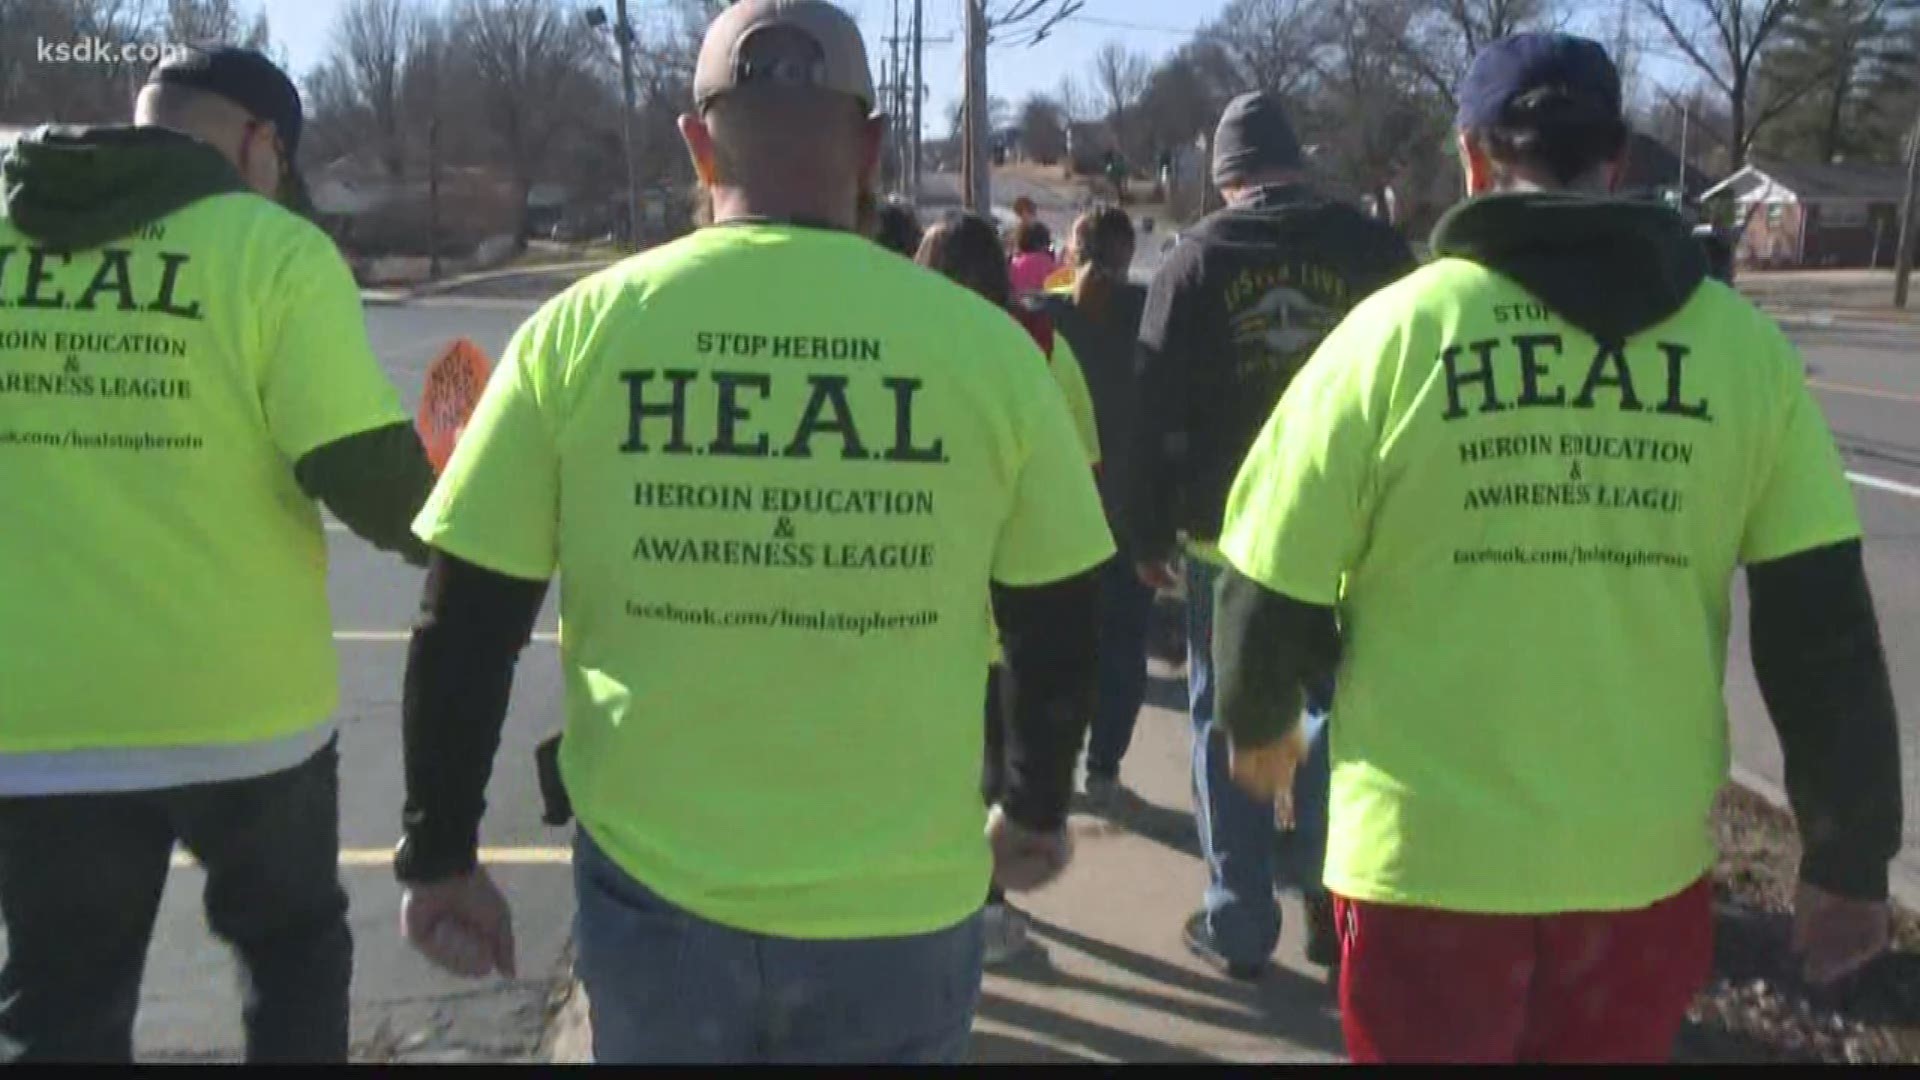 In an effort to fight heroin and opioid addiction dozens walked Saturday to spread awareness about the epidemic.